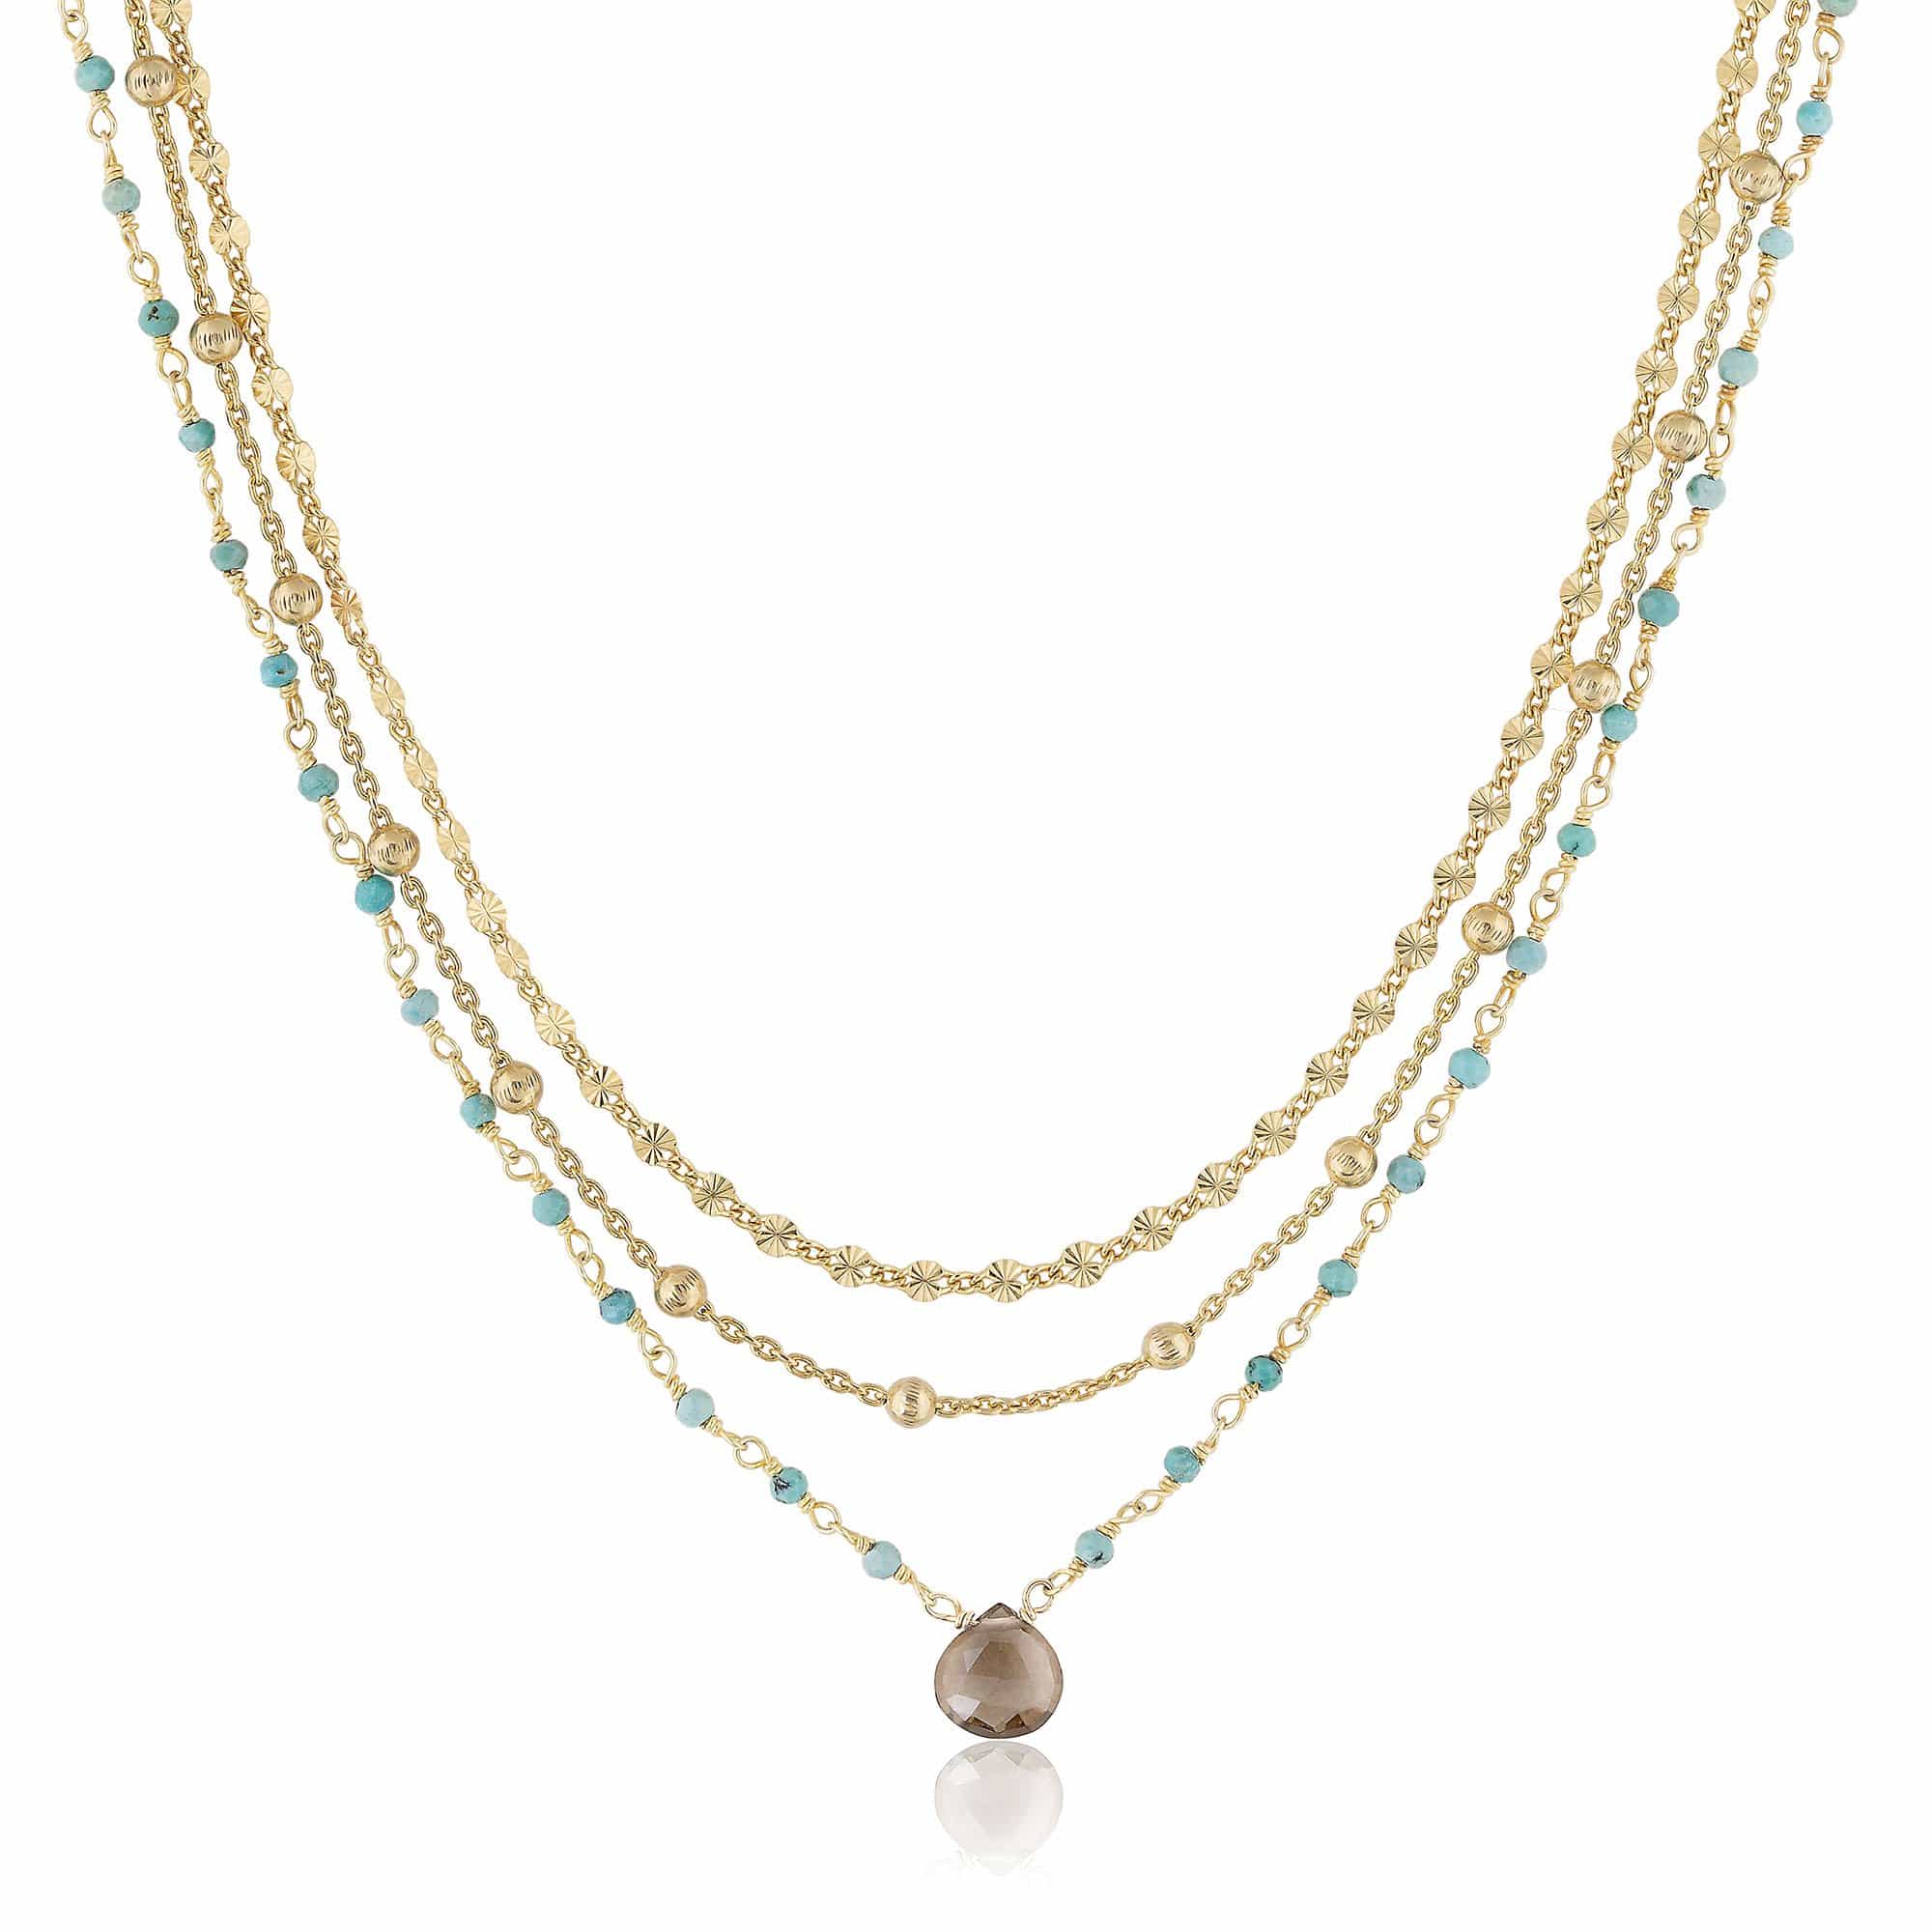 ela rae lina three in one triple layer necklace turquoise smoky quartz 14k yellow gold plate